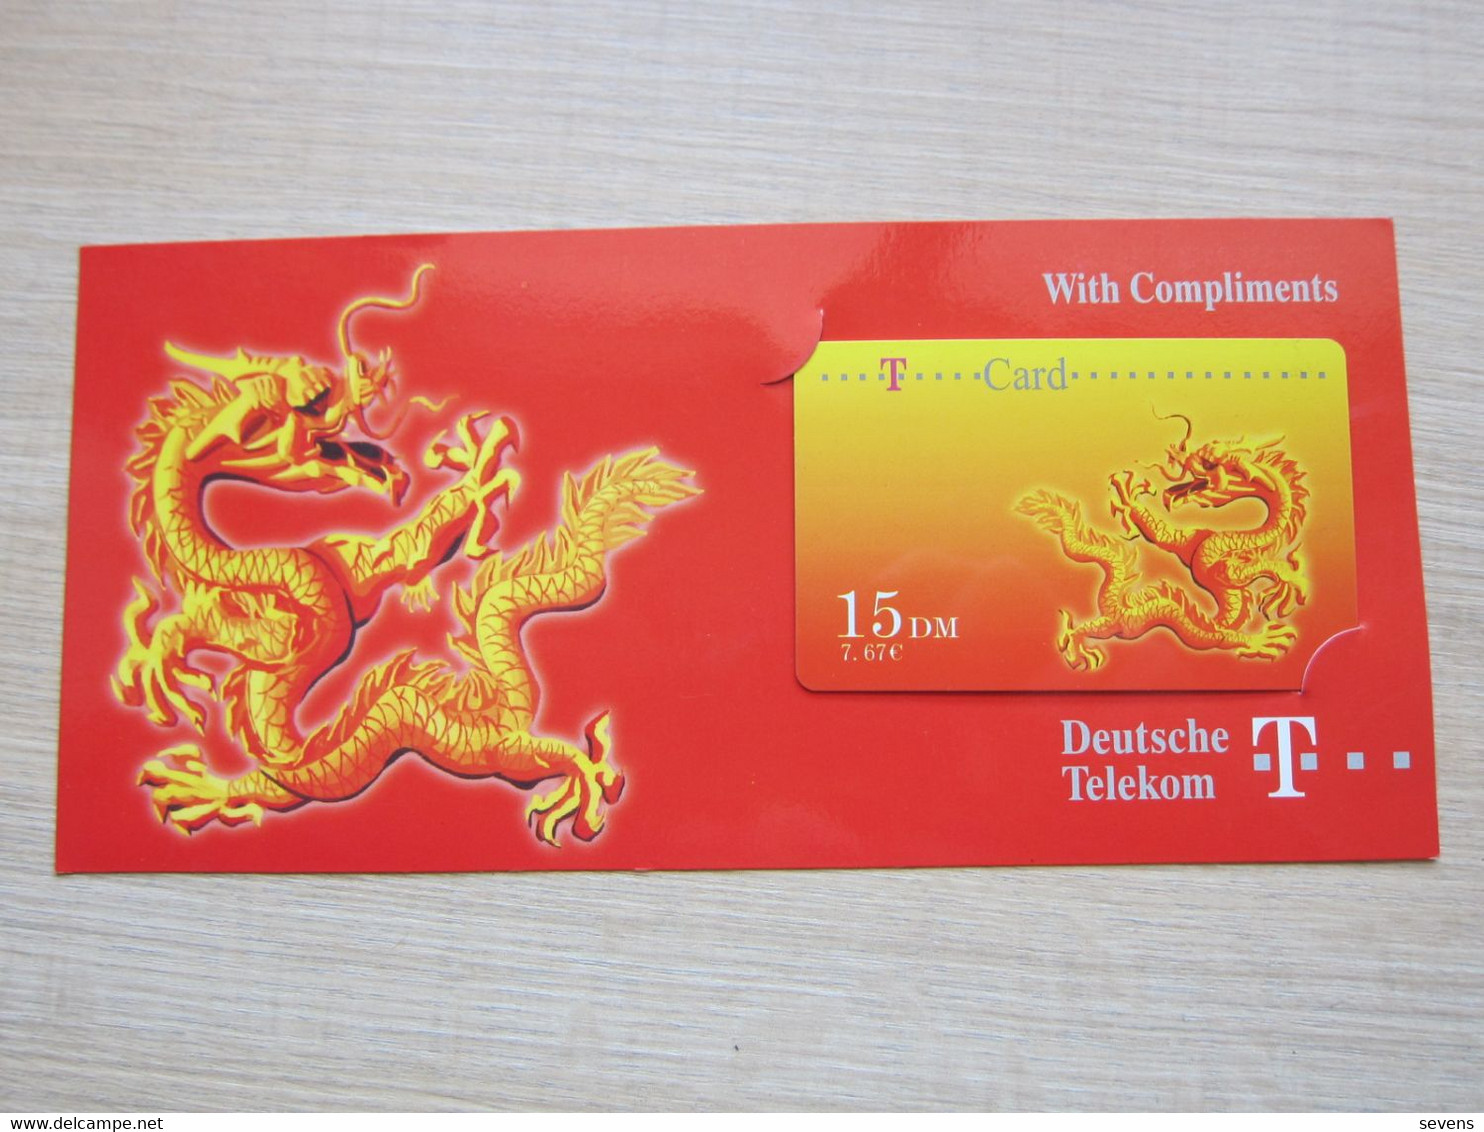 Compliments By Deutsche Telekom Representation Beijing, Year Of Dragon, Mint Expired,1500 Pcs Issued - [3] T-Pay Micro-Money